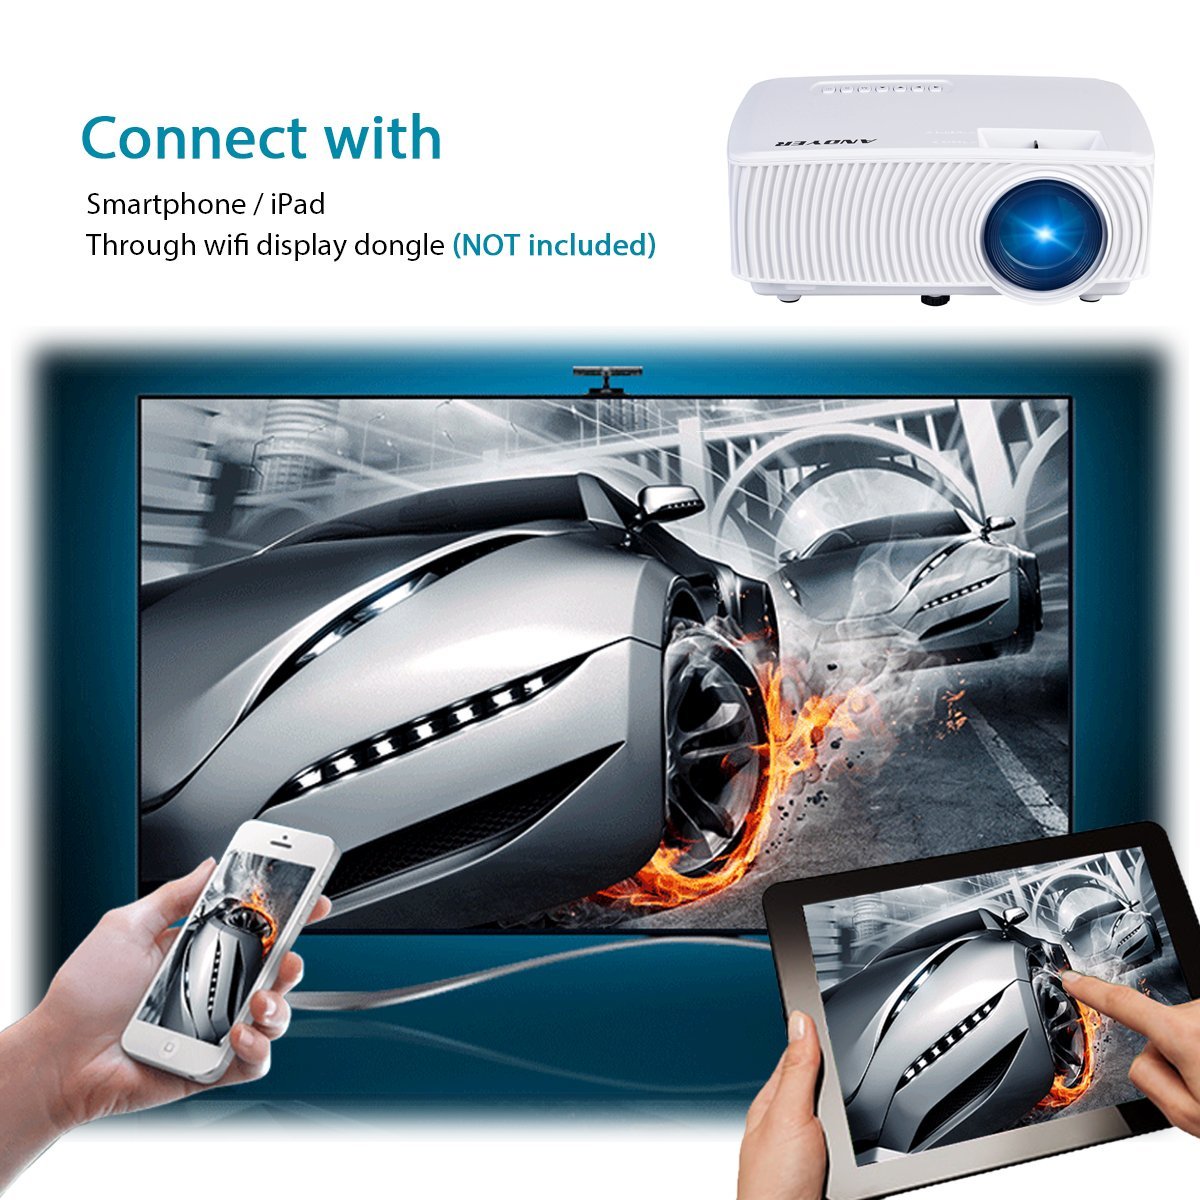 Andyer RD-816 Mini Portable projector